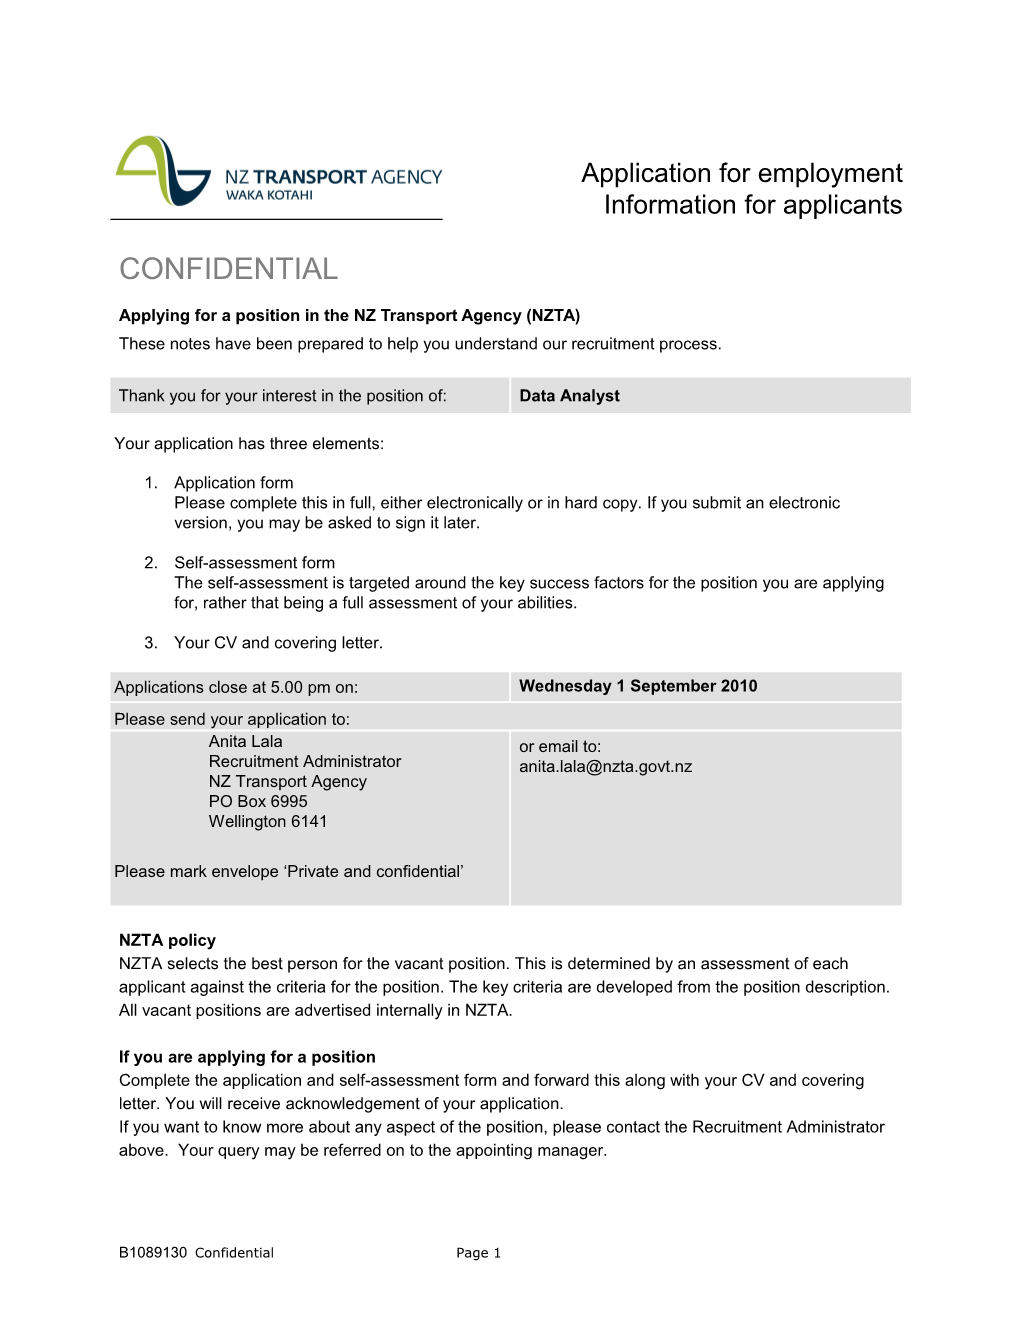 Applying for a Position in the NZ Transport Agency (NZTA)